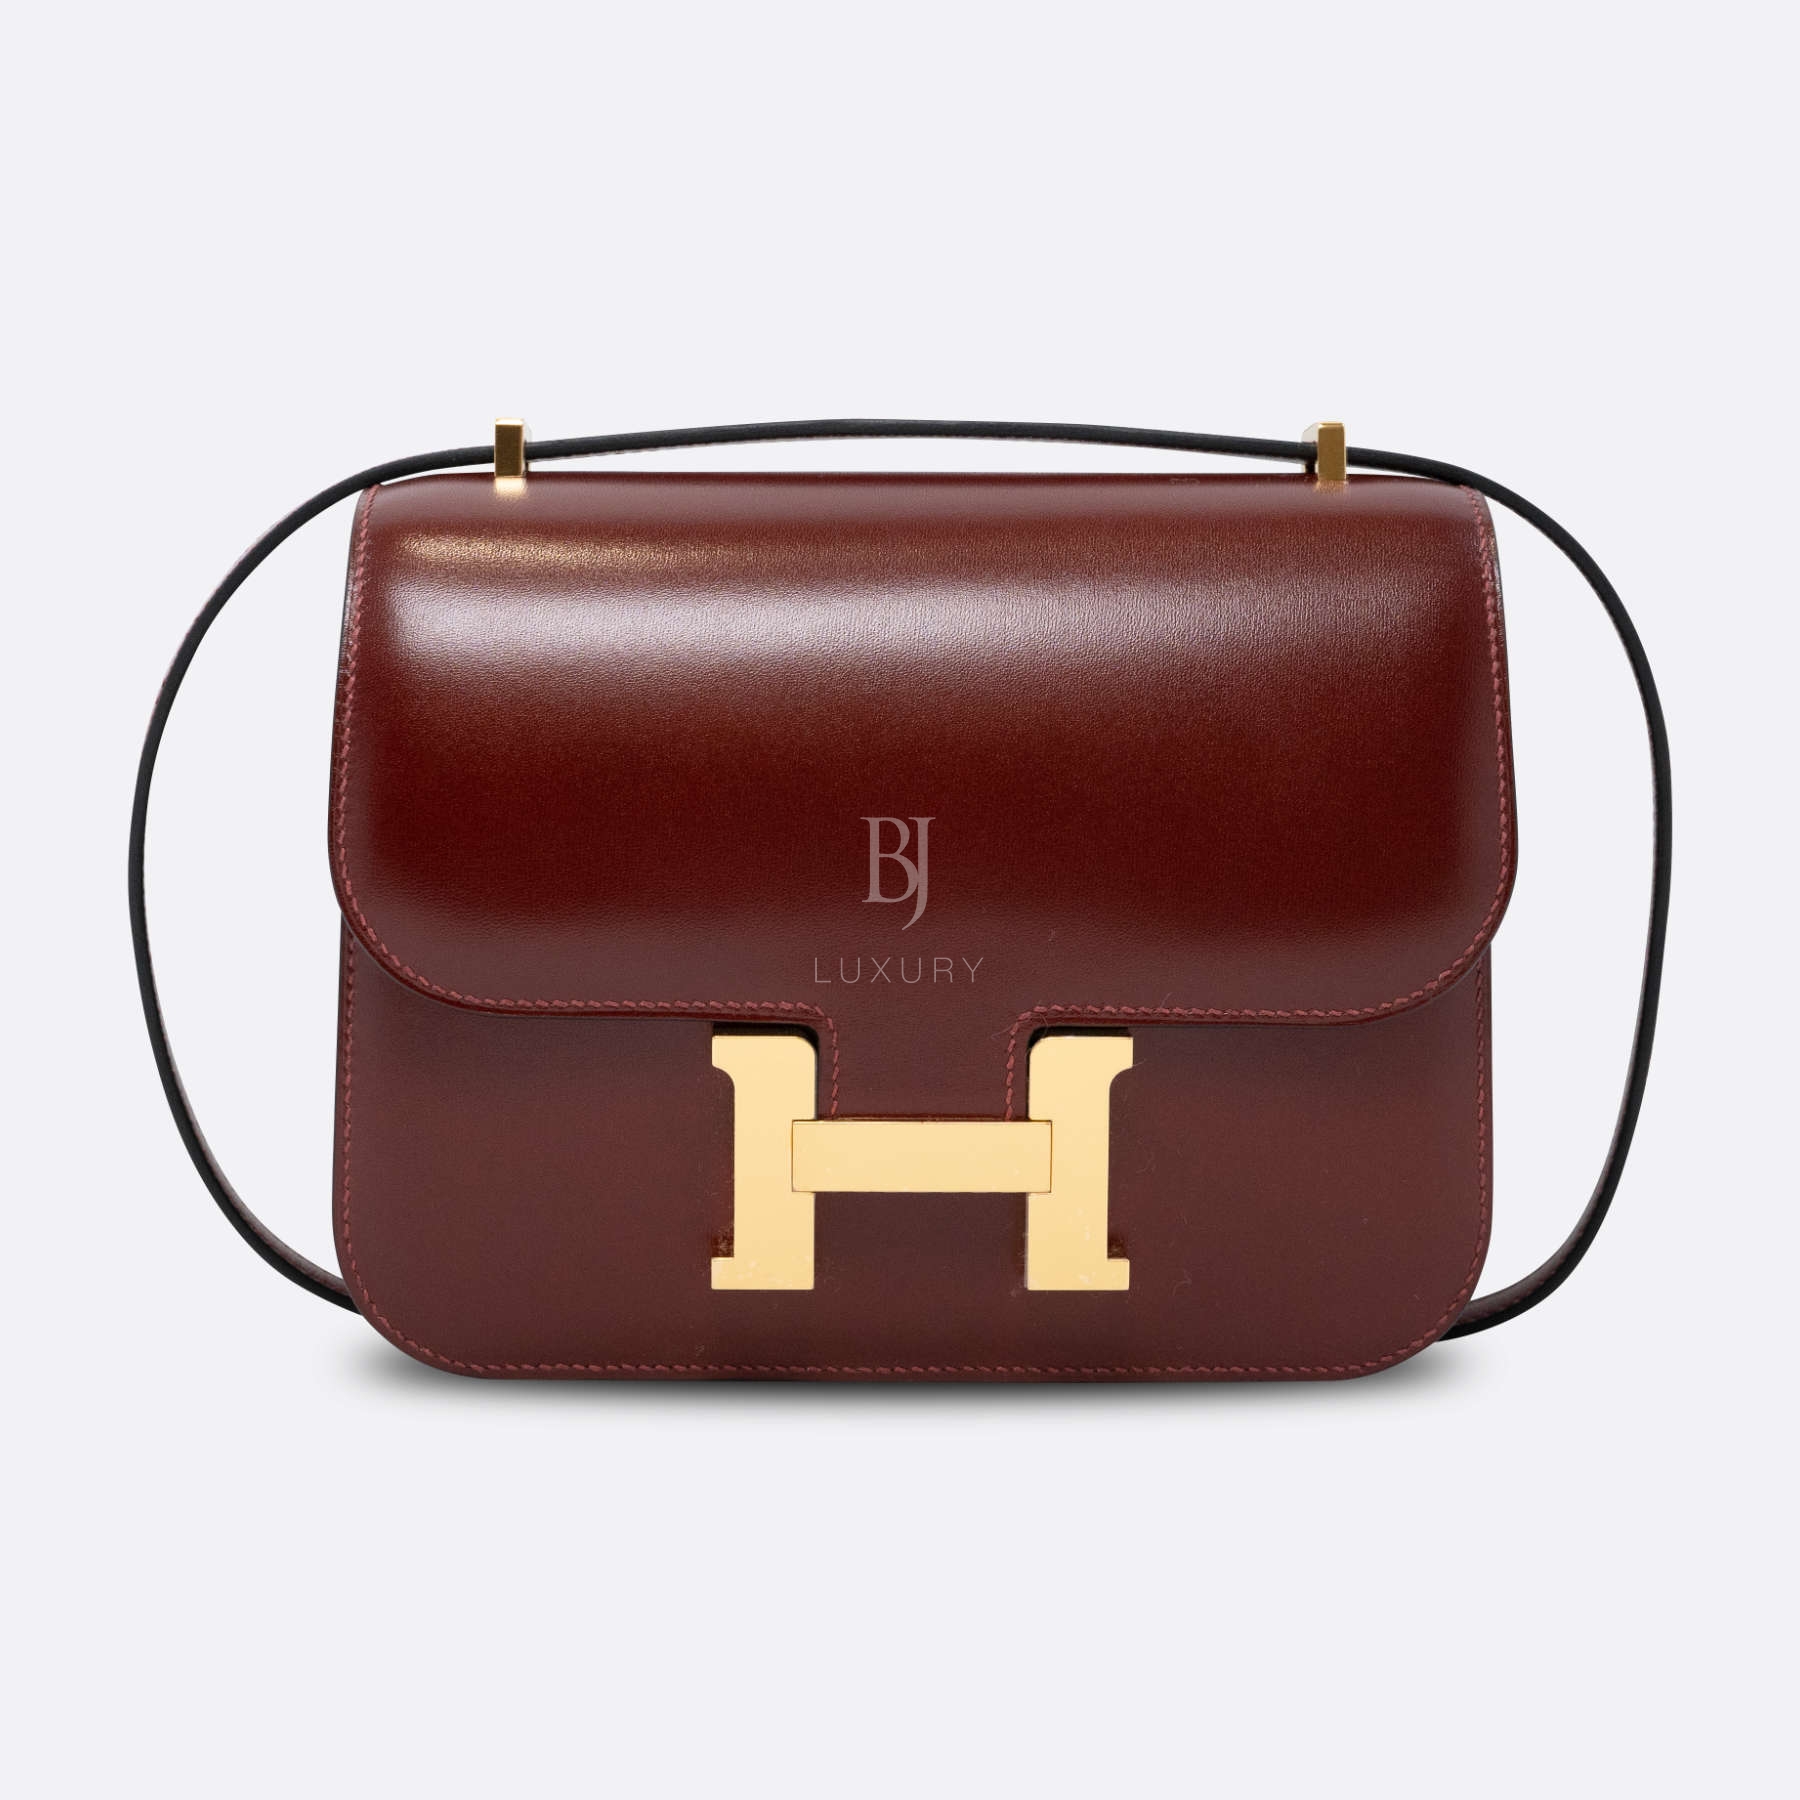 HERMES-CONSTANCE-18-ROUGEH-BOXCALF-4537 front.jpg